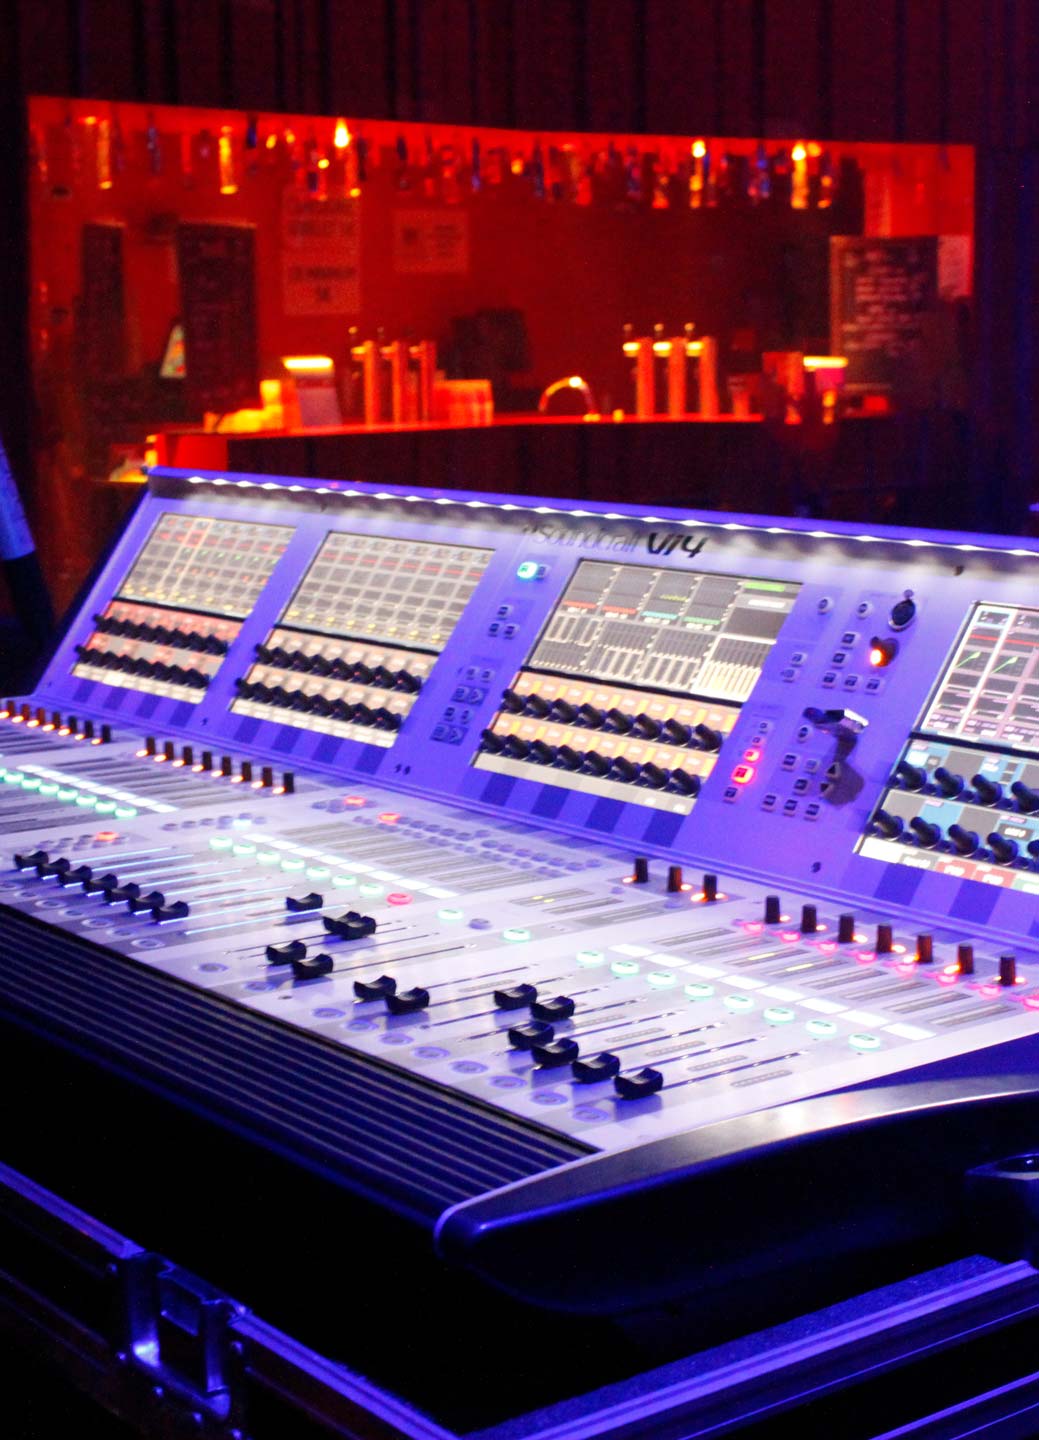 A close-up of a large, illuminated audio mixing console